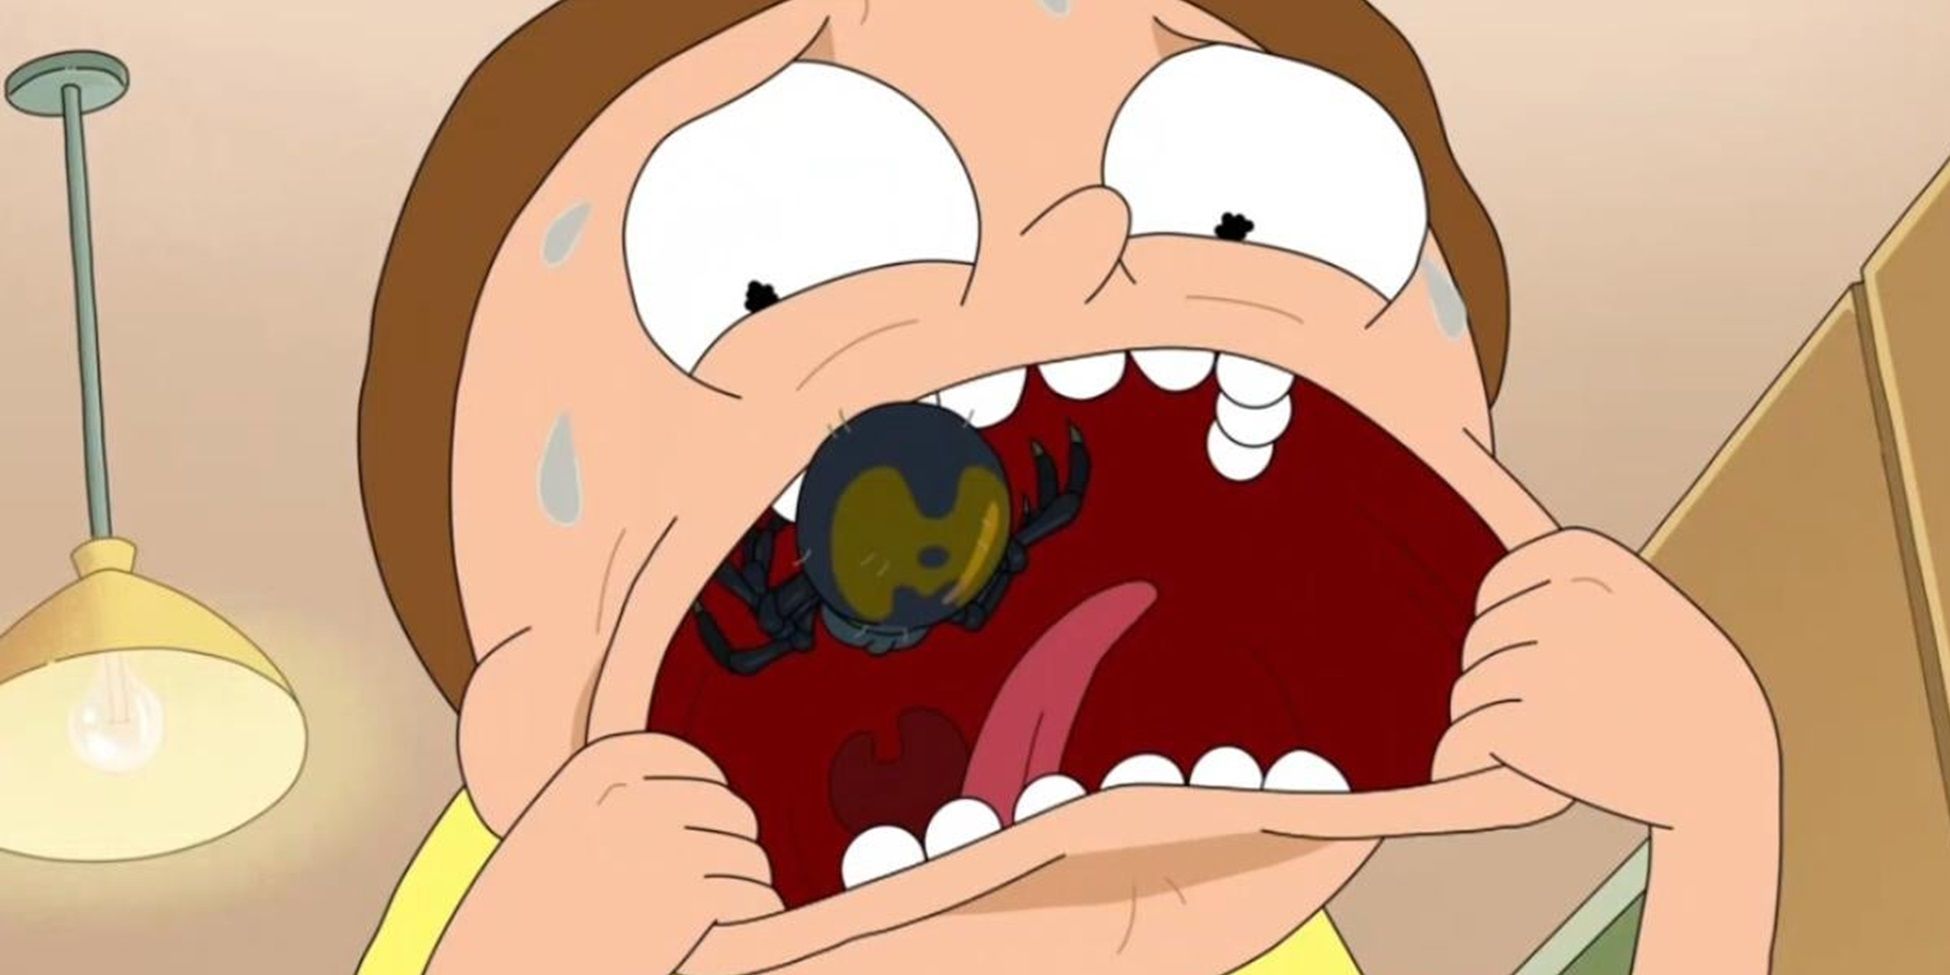 A spider crawls into Morty's mouth in Rick and Morty